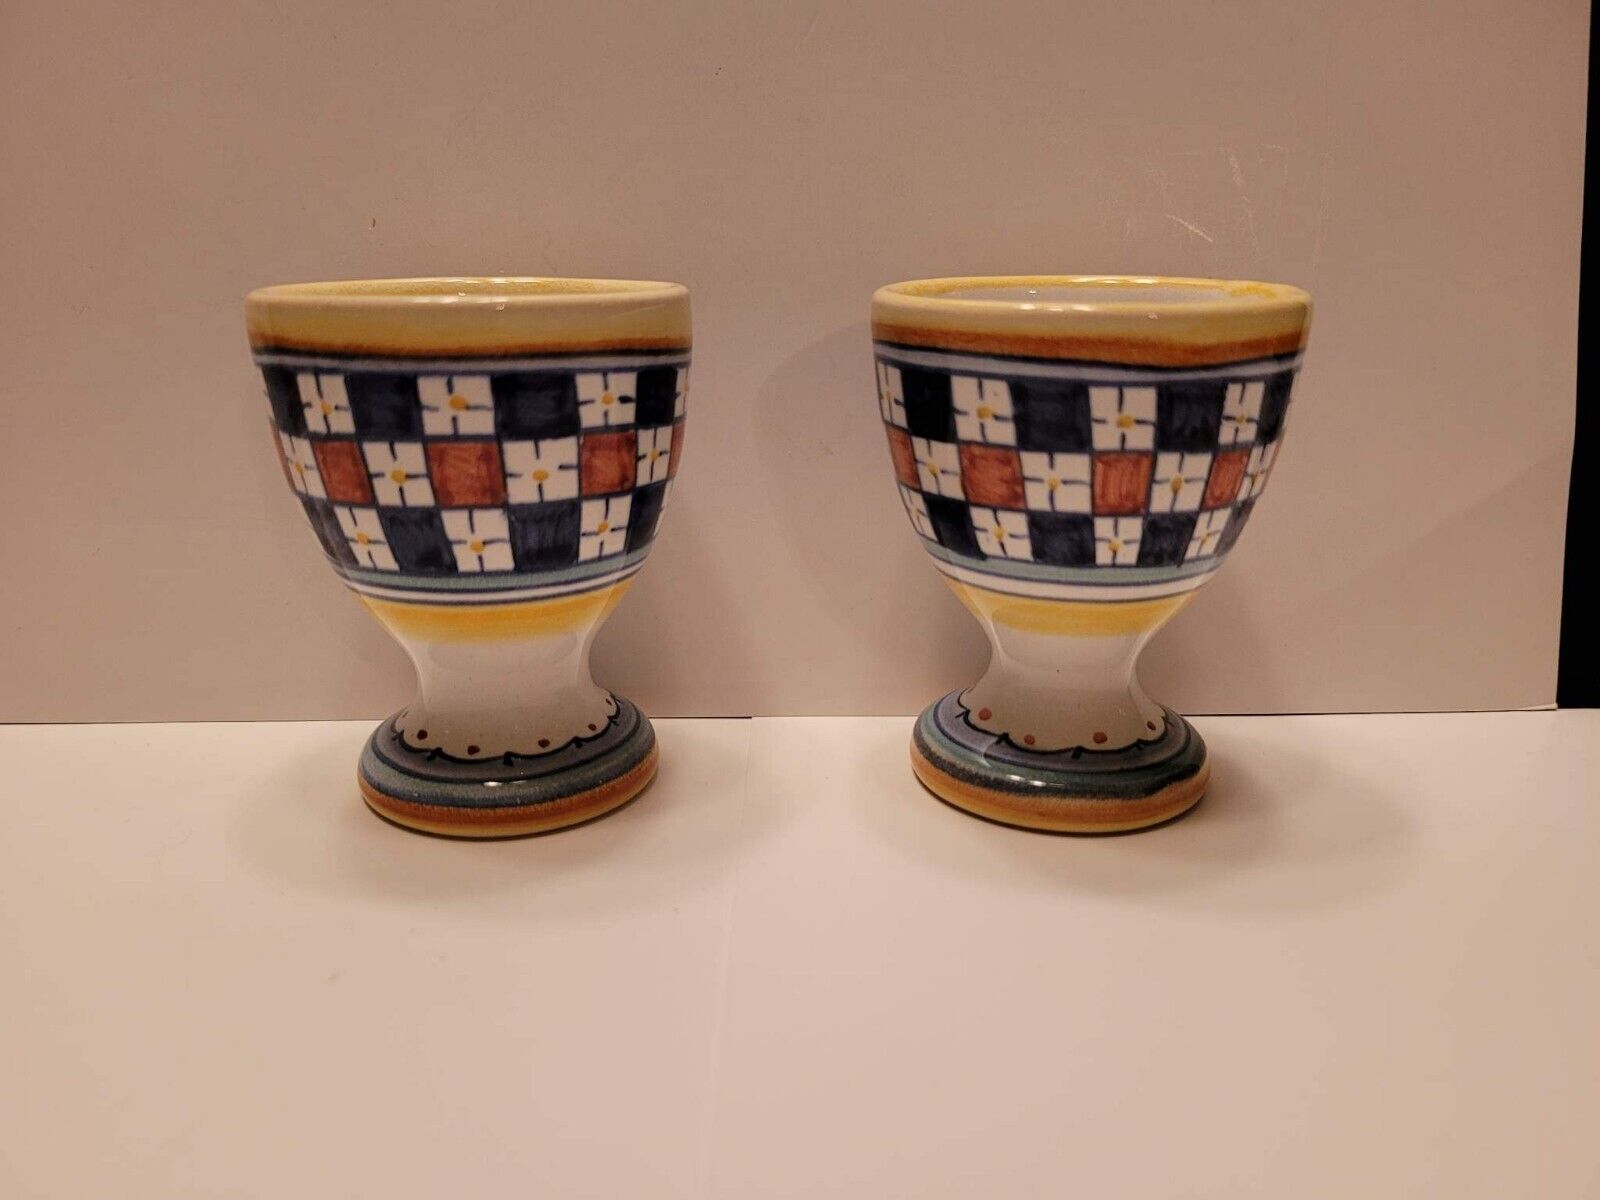 Pair of G.P. Gialletti Pimpinelli Deruta Italy Pottery Egg Cups 